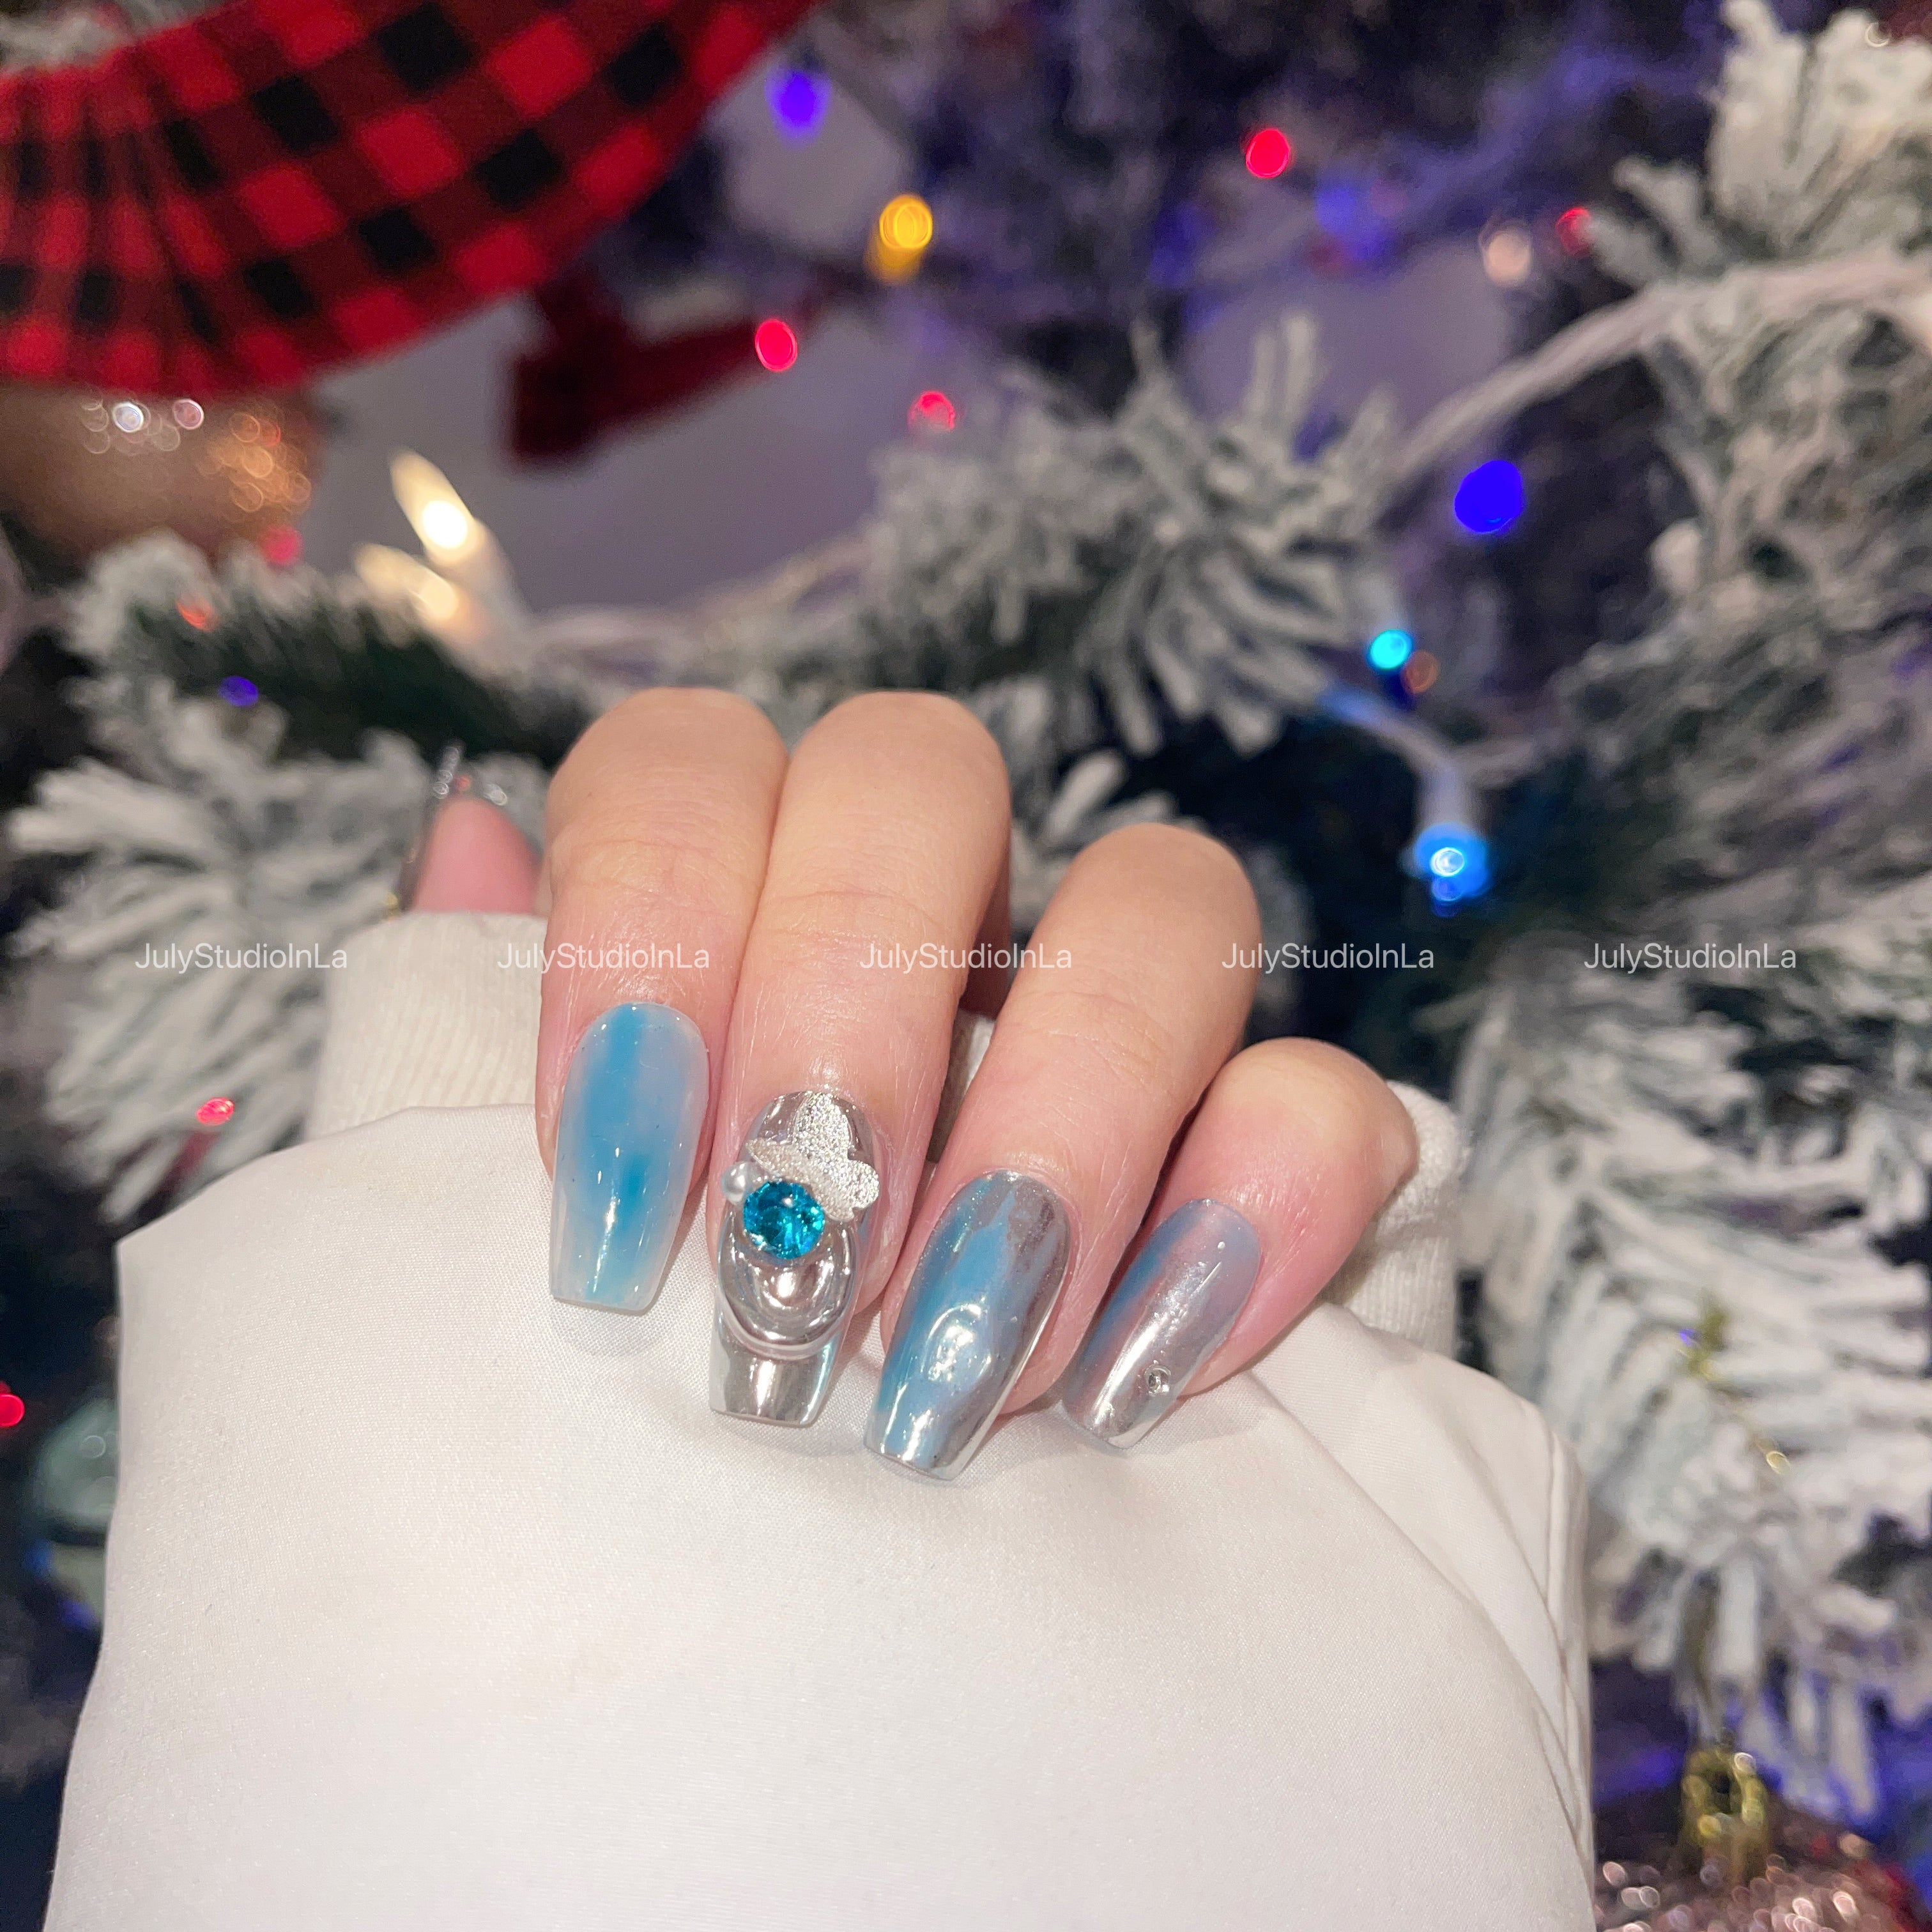 Love the shades of blue the nail tech did. This nail art design is hot with  rhinestone accents #nailart | Nails design with rhinestones, Pretty nails,  Nail art